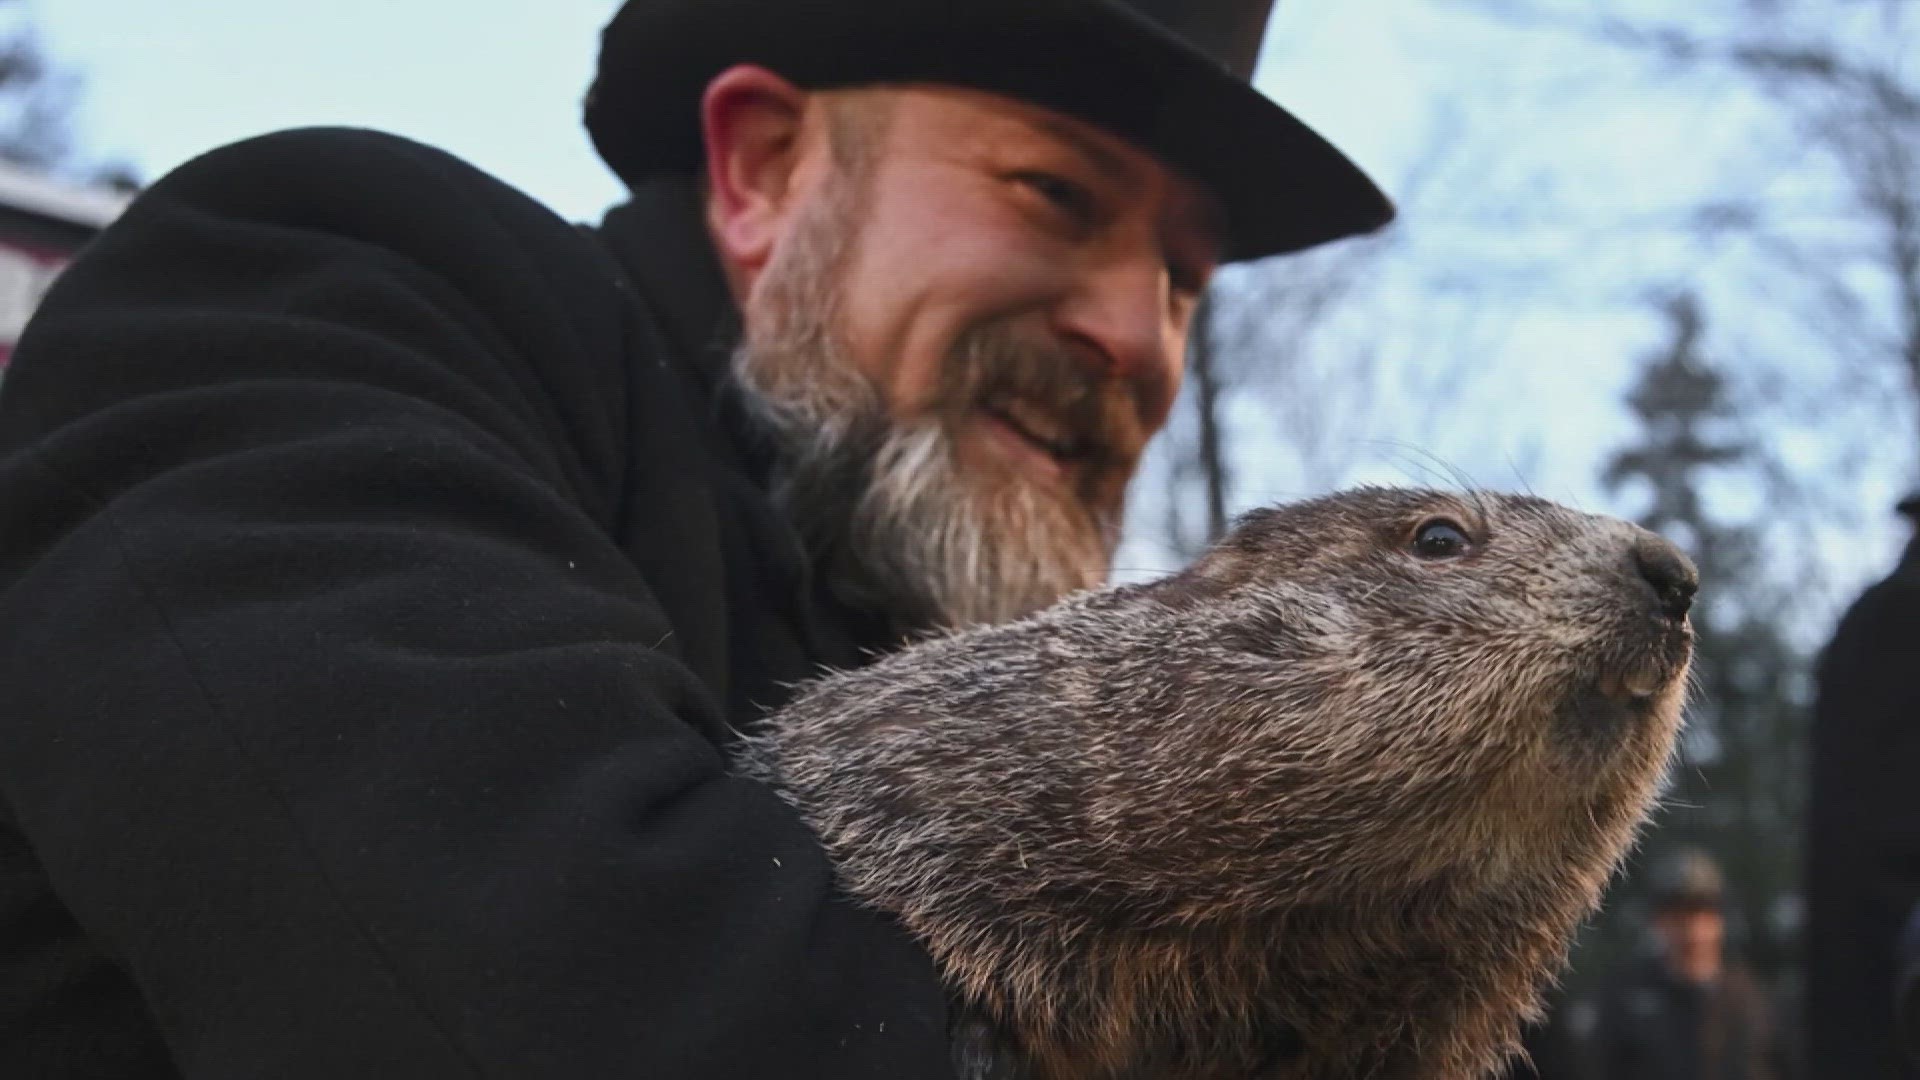 Groundhog Day 2024 Punxsutawney Phil doesn’t see his shadow, now an early spring!